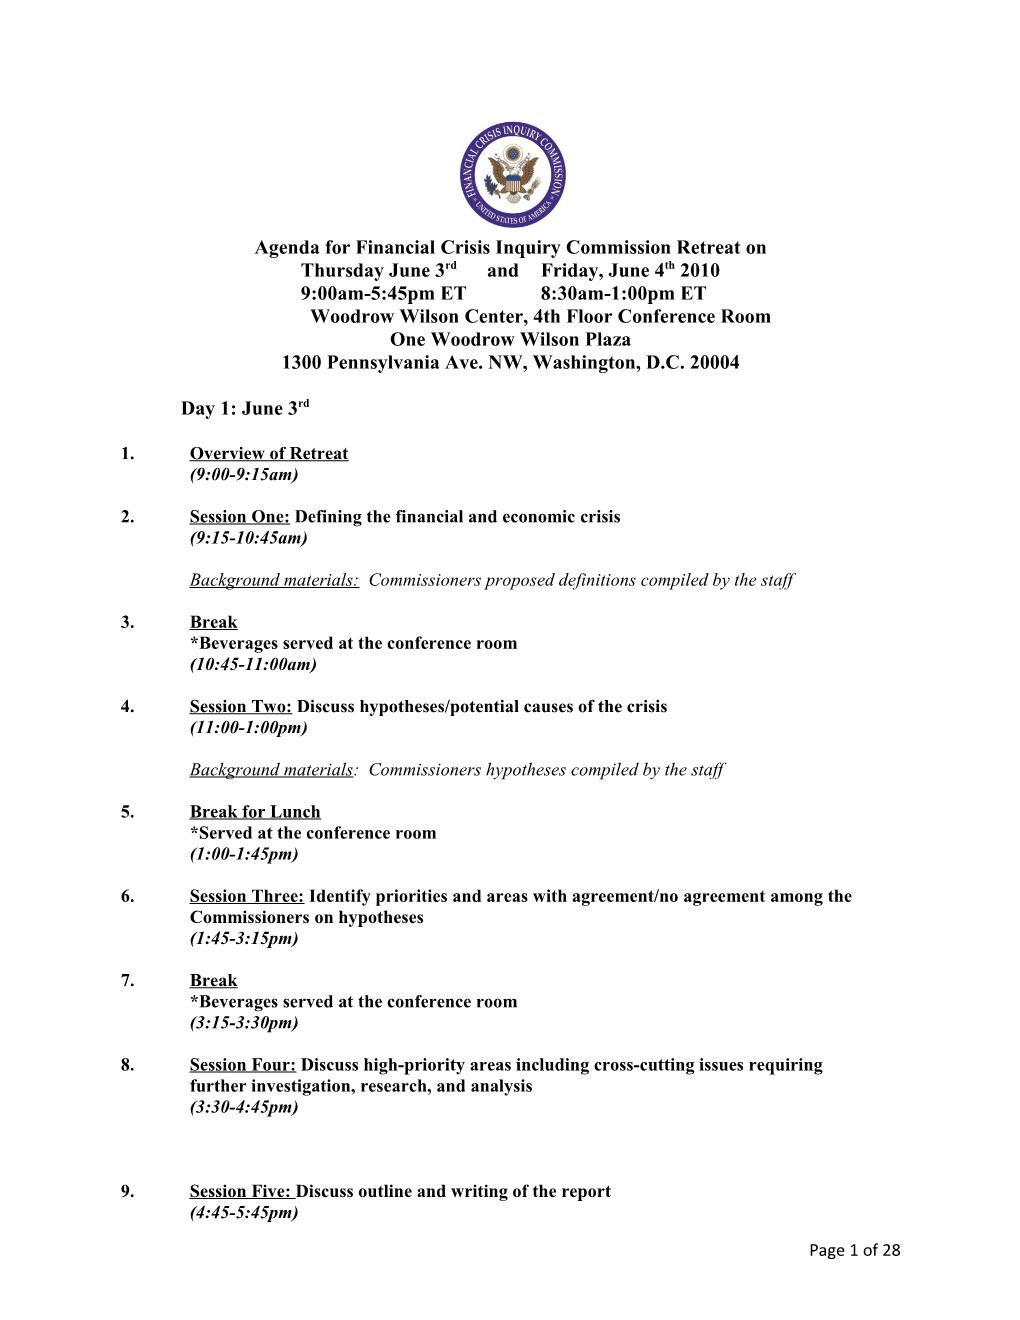 Agenda for Financial Crisis Inquiry Commission Retreat On